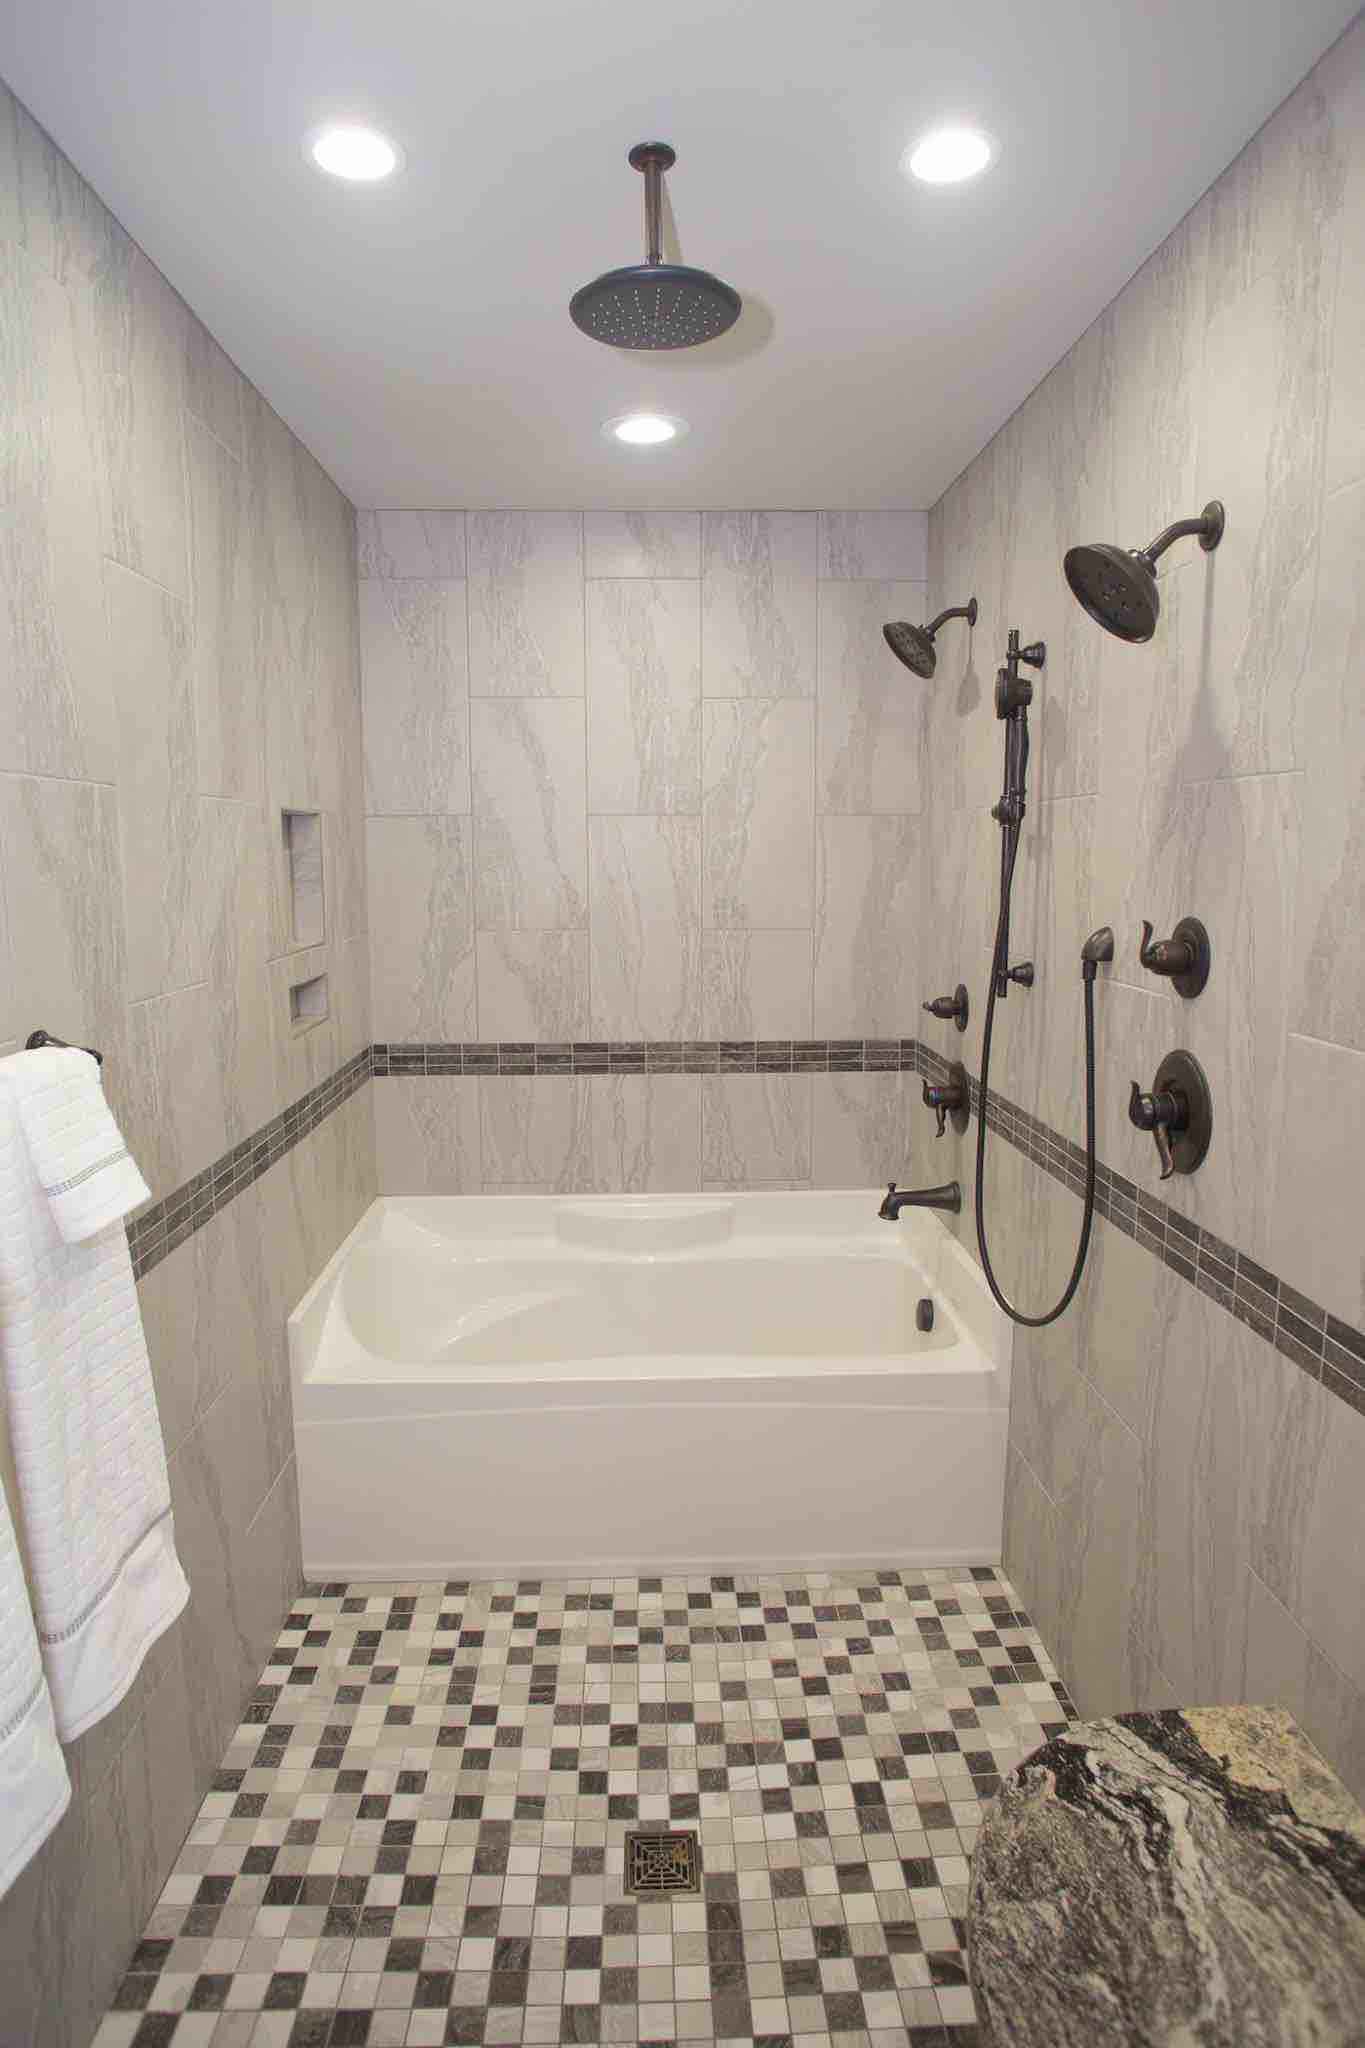 180 Spaces | Interior Design Turnarounds - Master Bath remodel featuring tub inside the doorless shower!  Great for doggy bath time!